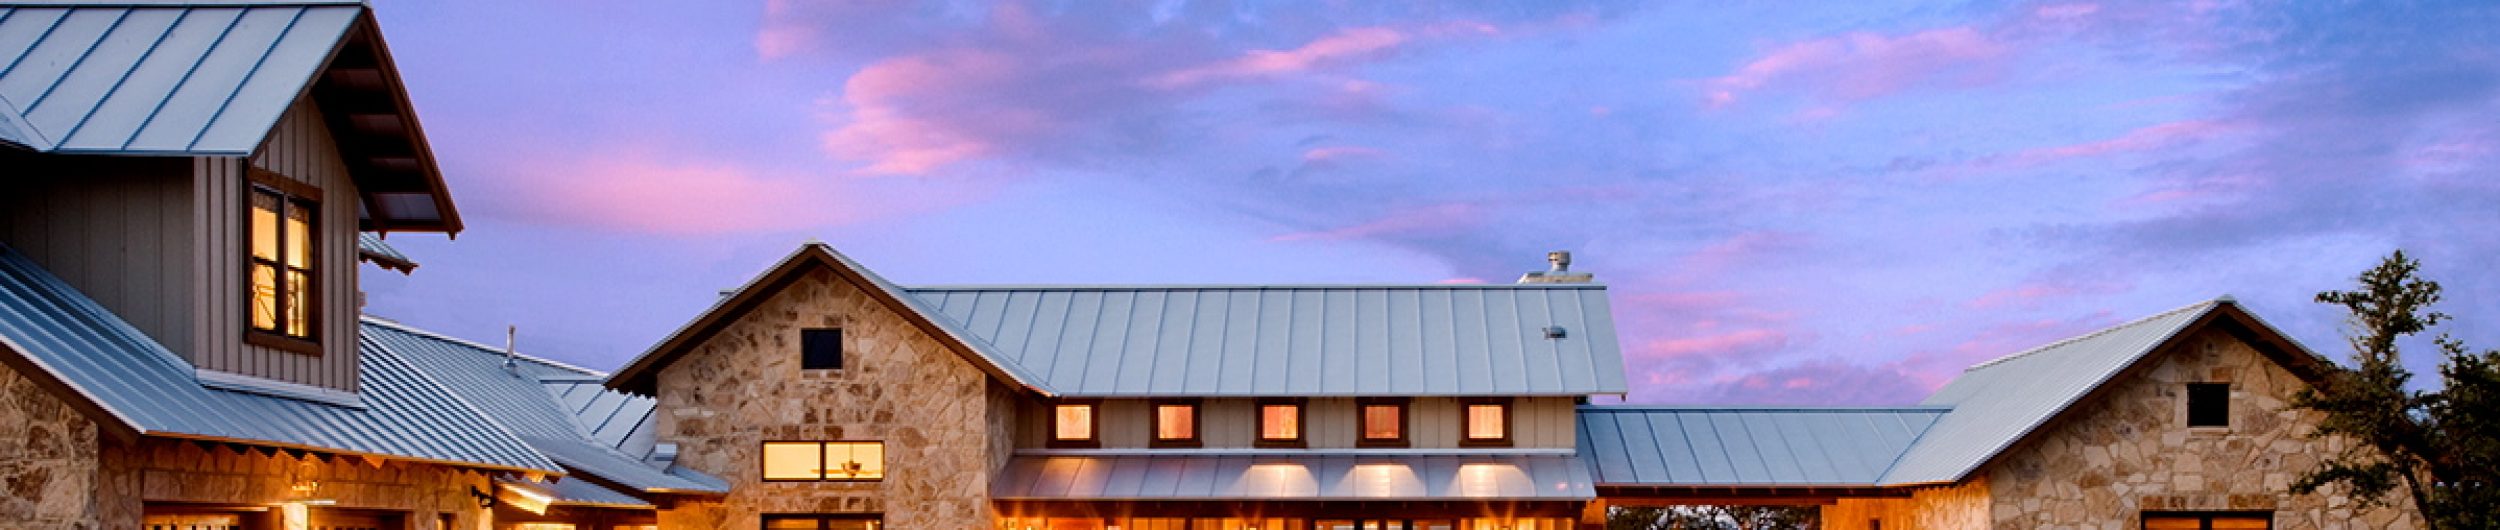 MetalRoofing.Systems – Metal Roofing Systems